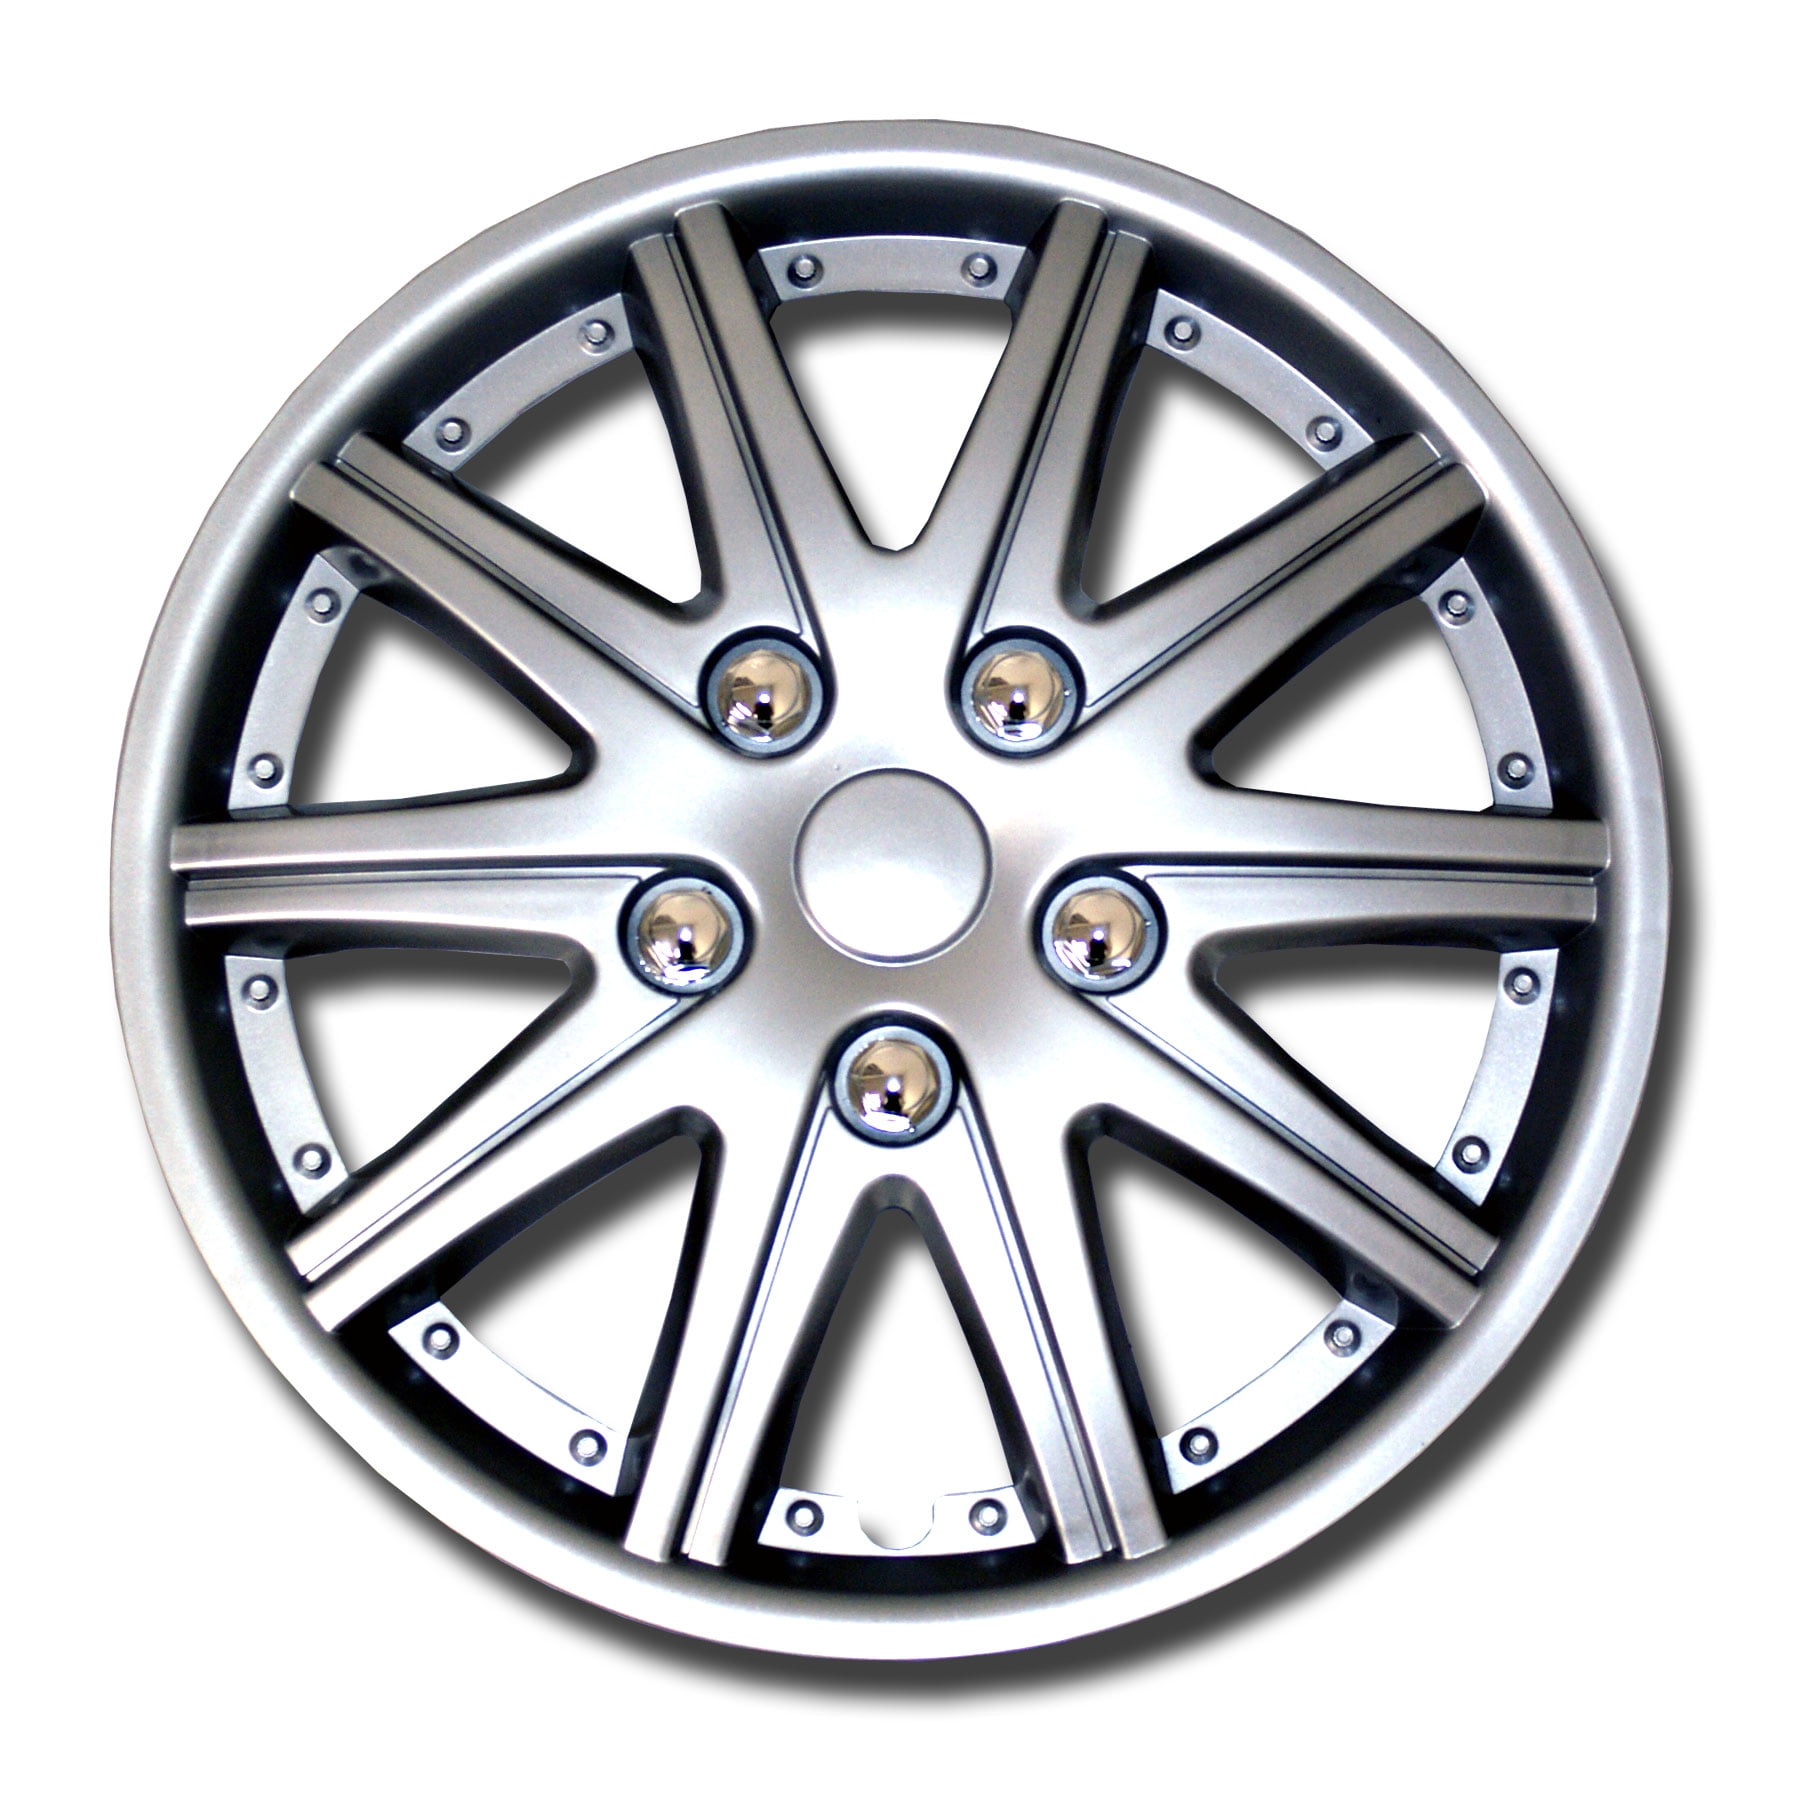 TuningPros WSC-029S15 Hubcaps Wheel Skin Cover 15-Inches Silver Set of 4